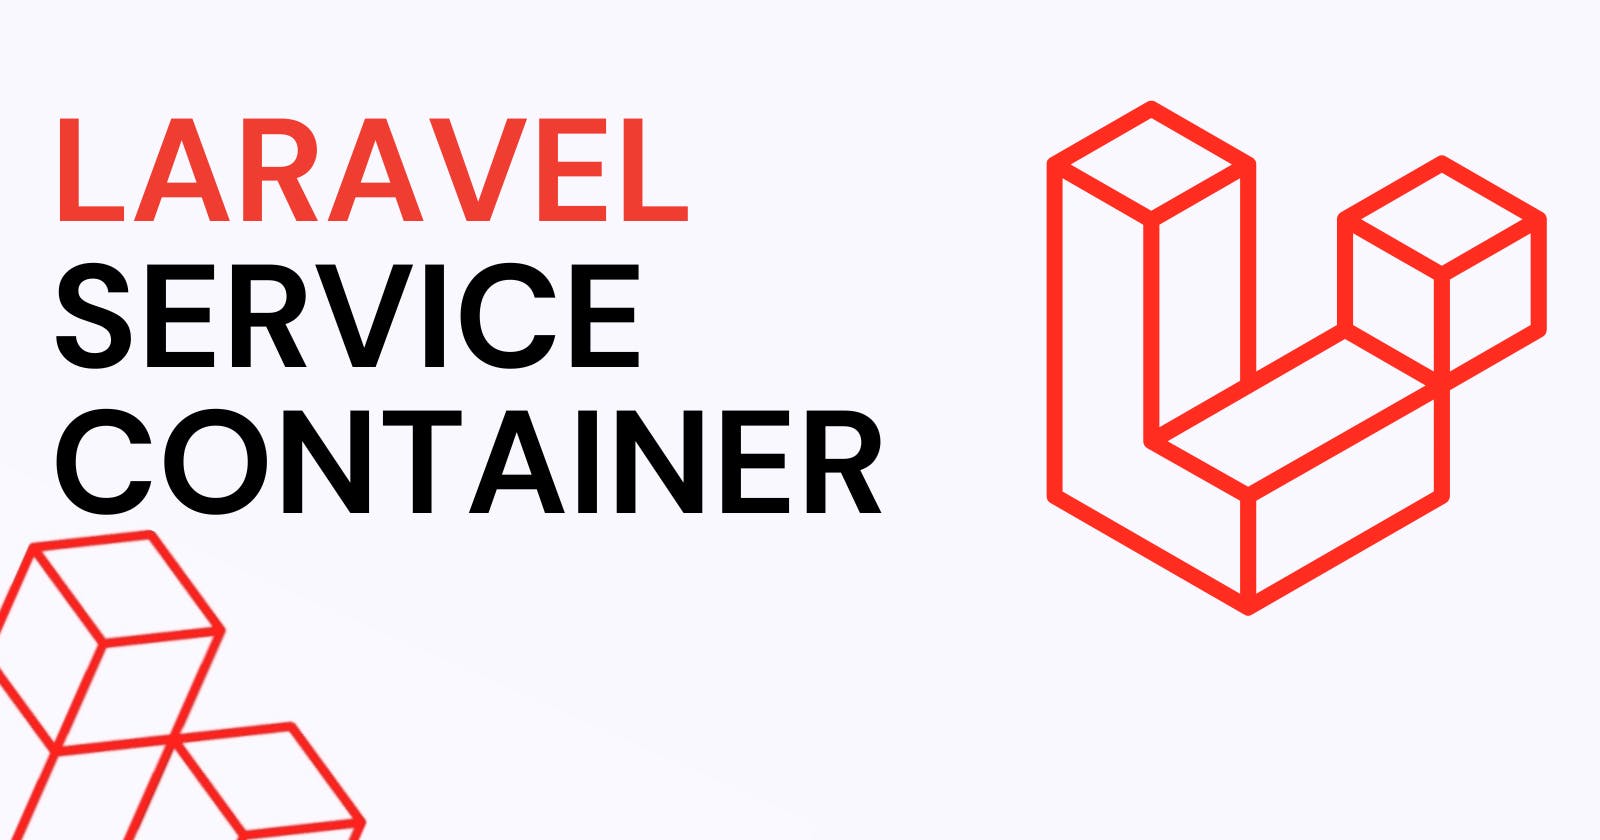 All you need to know about Laravel Service Container